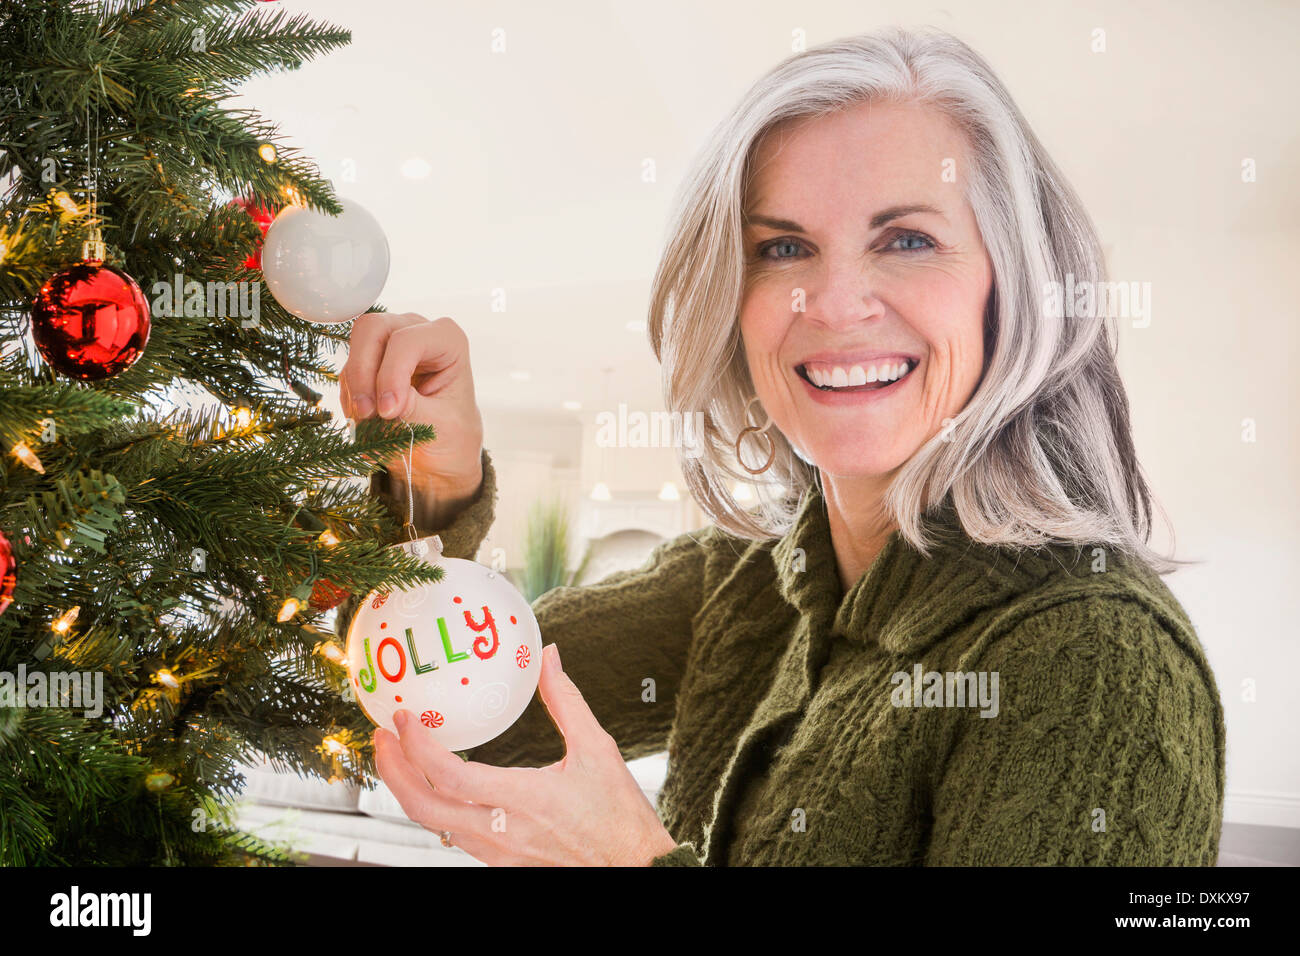 Portrait of Caucasian woman hanging ornaments on Christmas tree Stock Photo